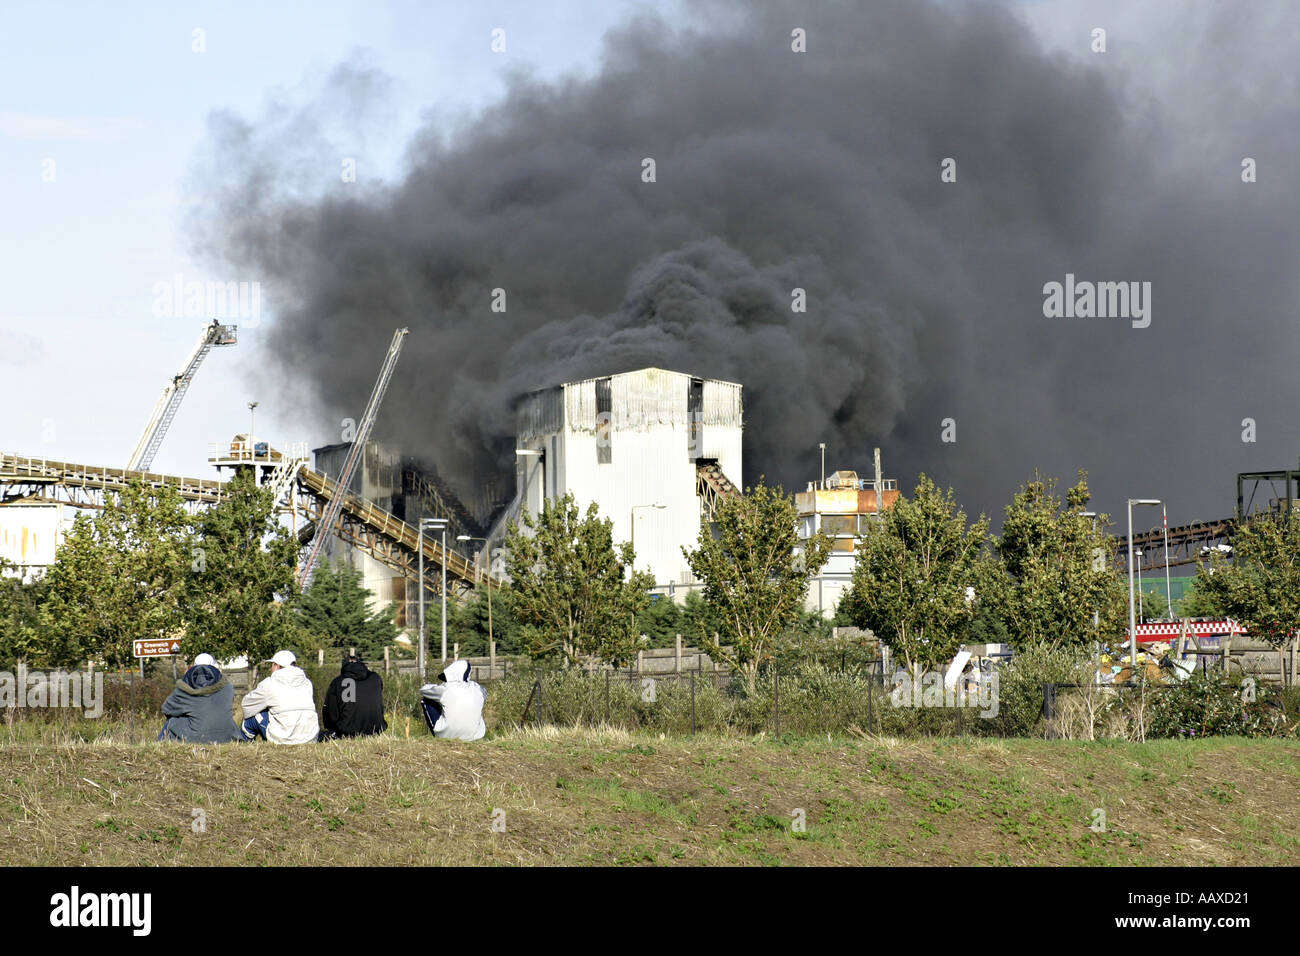 factory fire burning smoke black clouds toxic chemicals fumes pollution gas environment old disrepair decrepid decrepit city urb Stock Photo